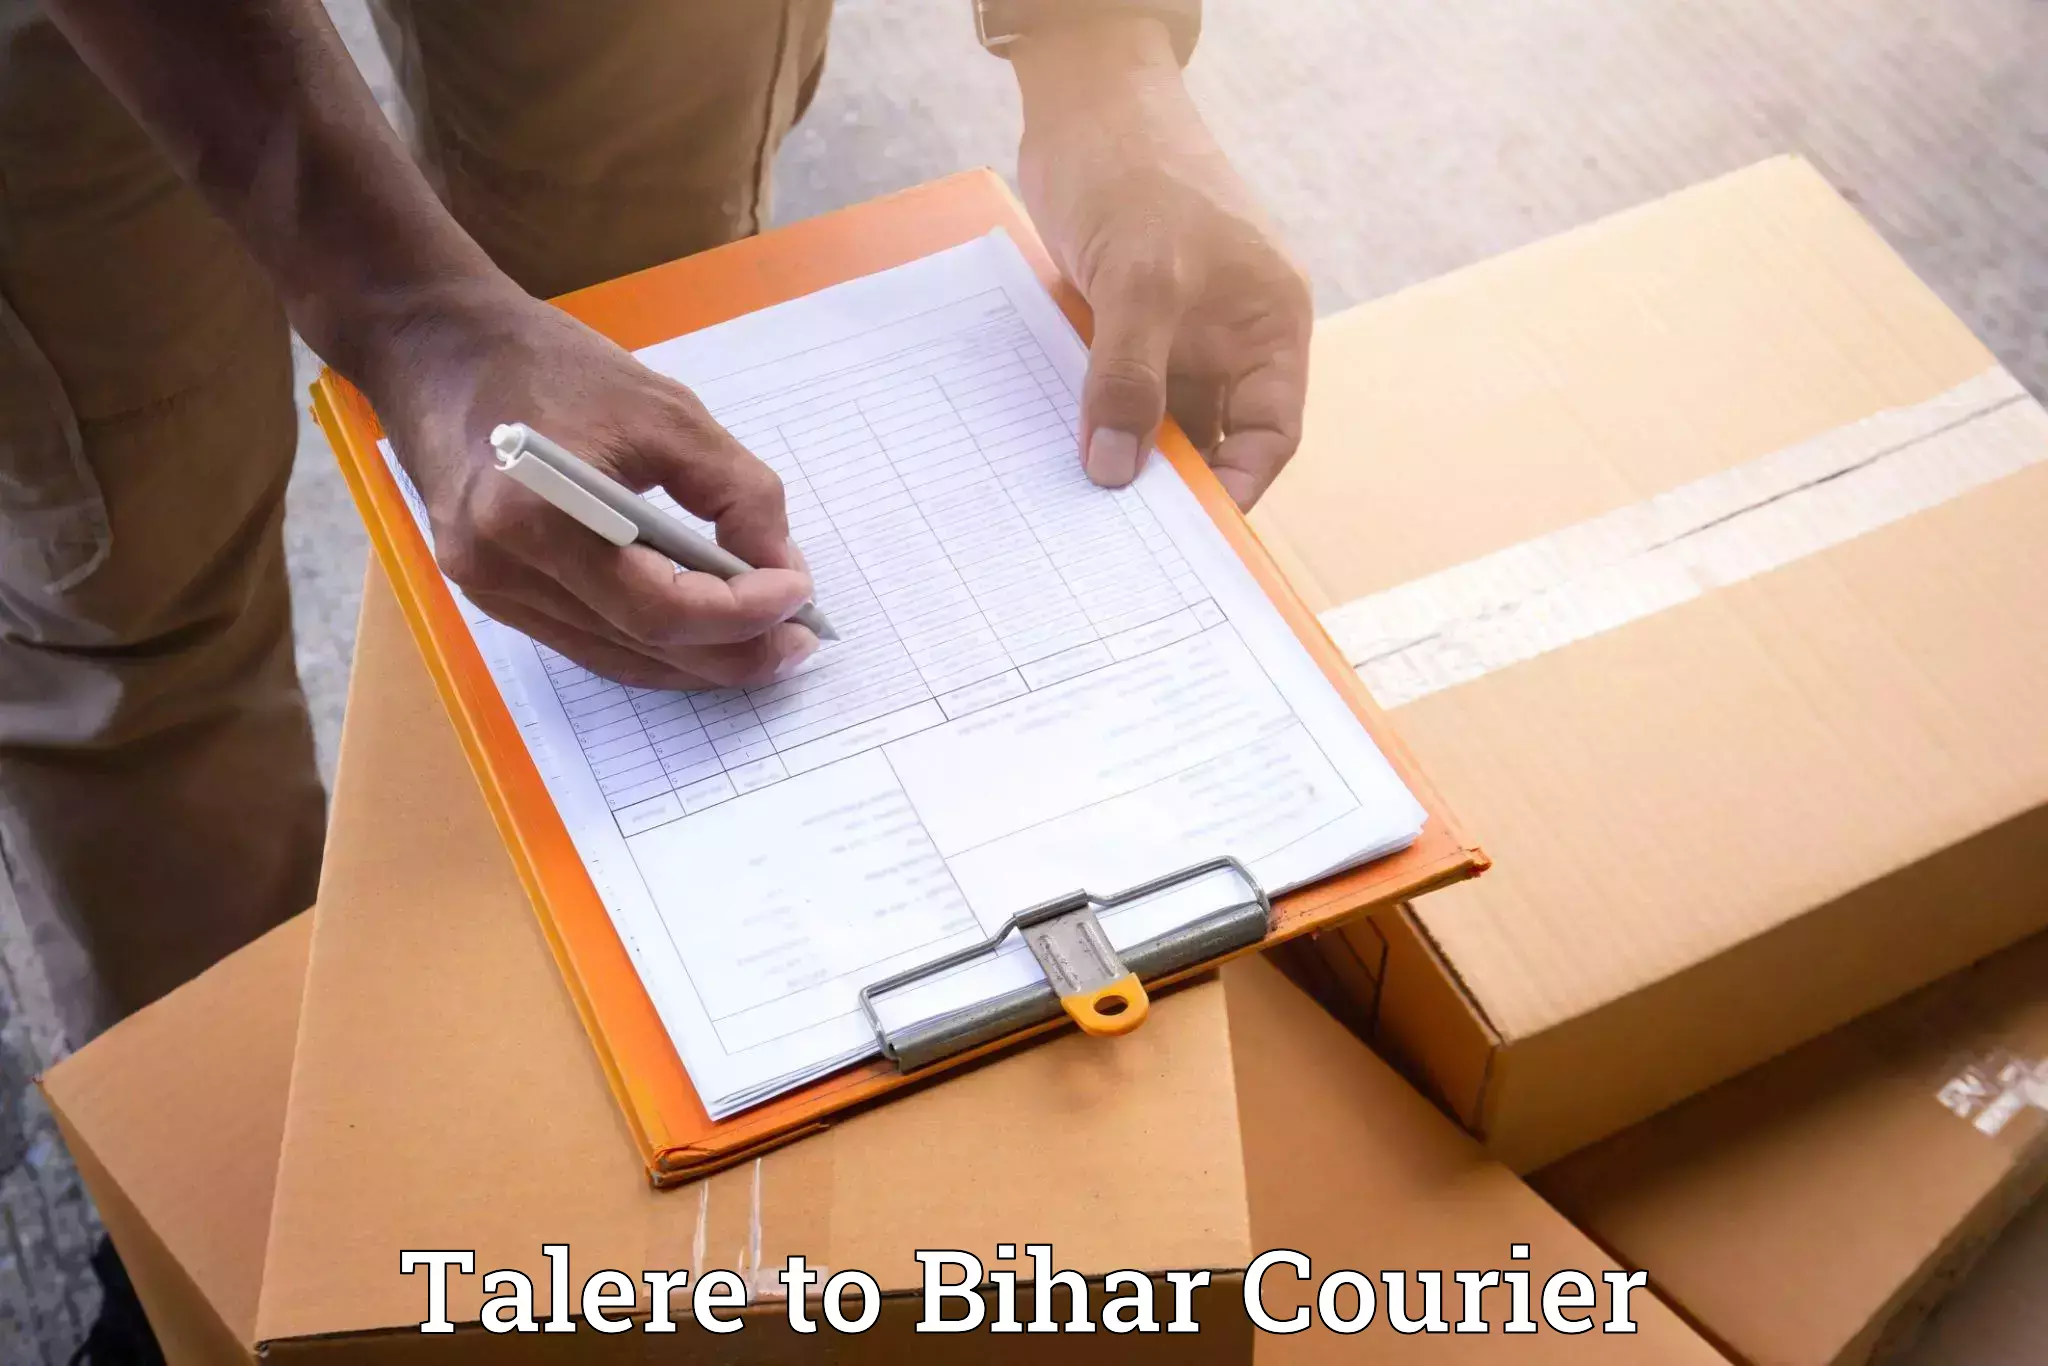 Home relocation experts Talere to Bihta